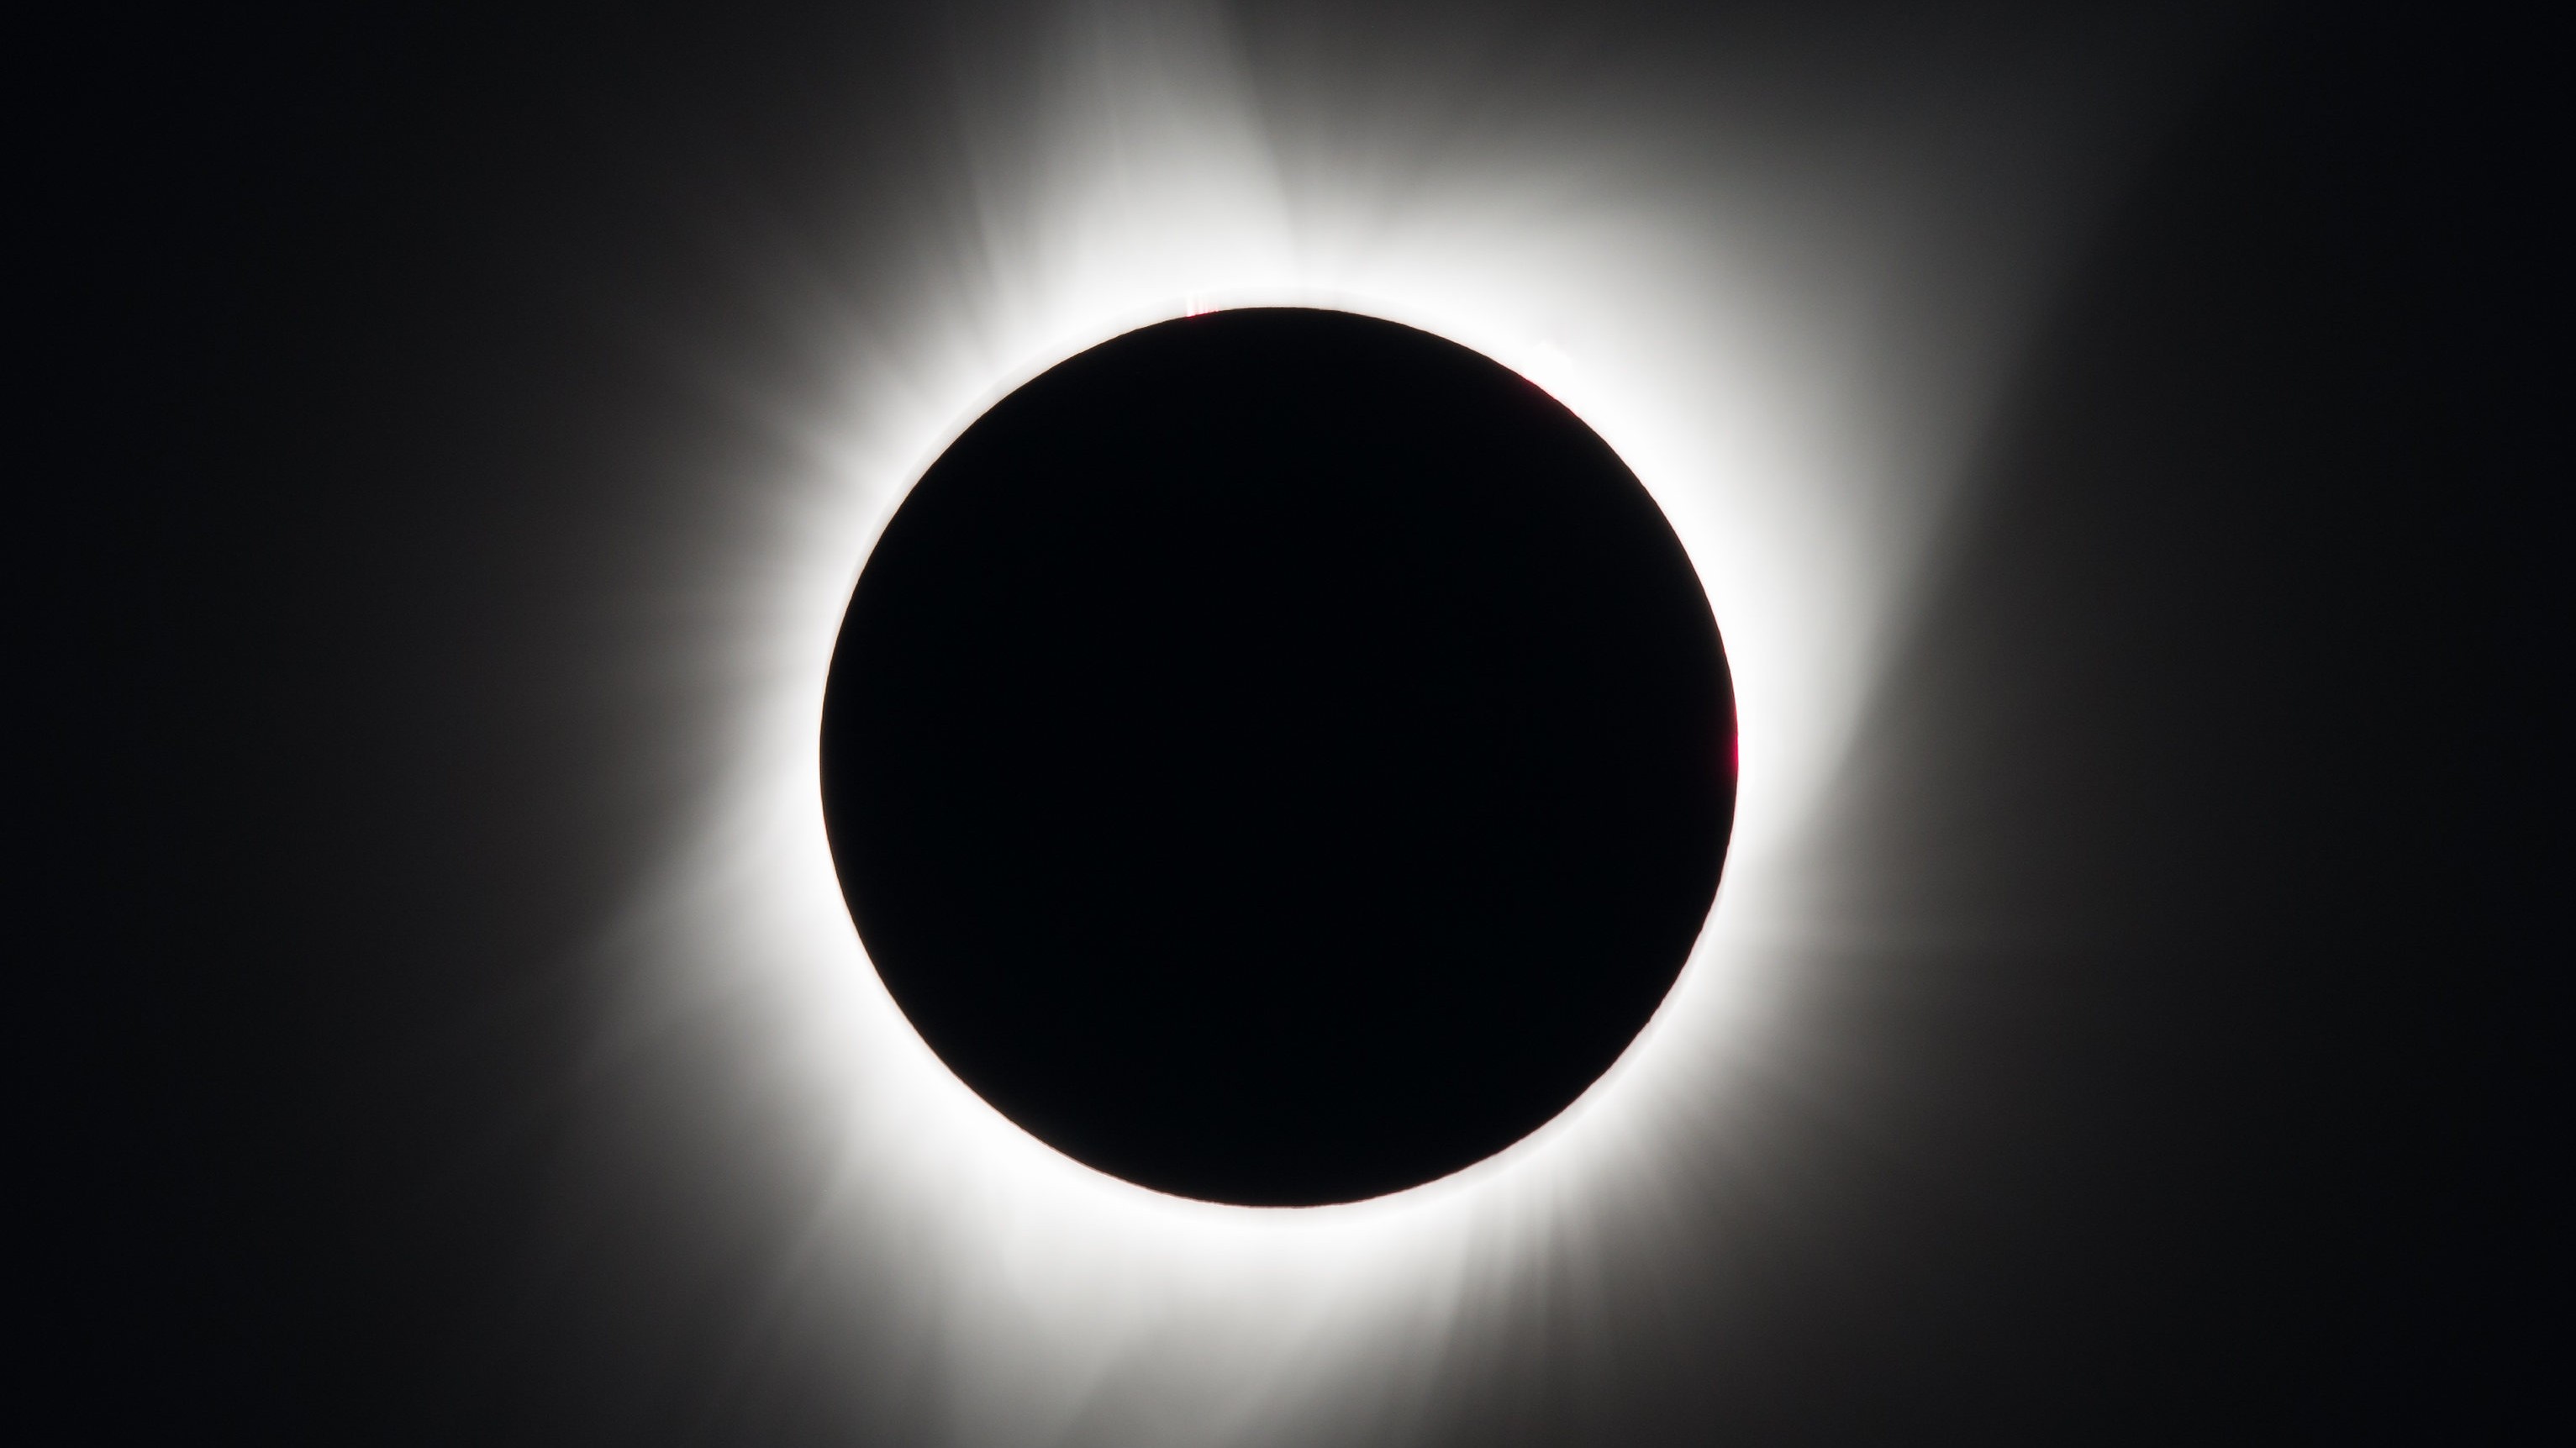 A total solar eclipse is seen on Aug. 21, 2017 above Madras, Oregon.